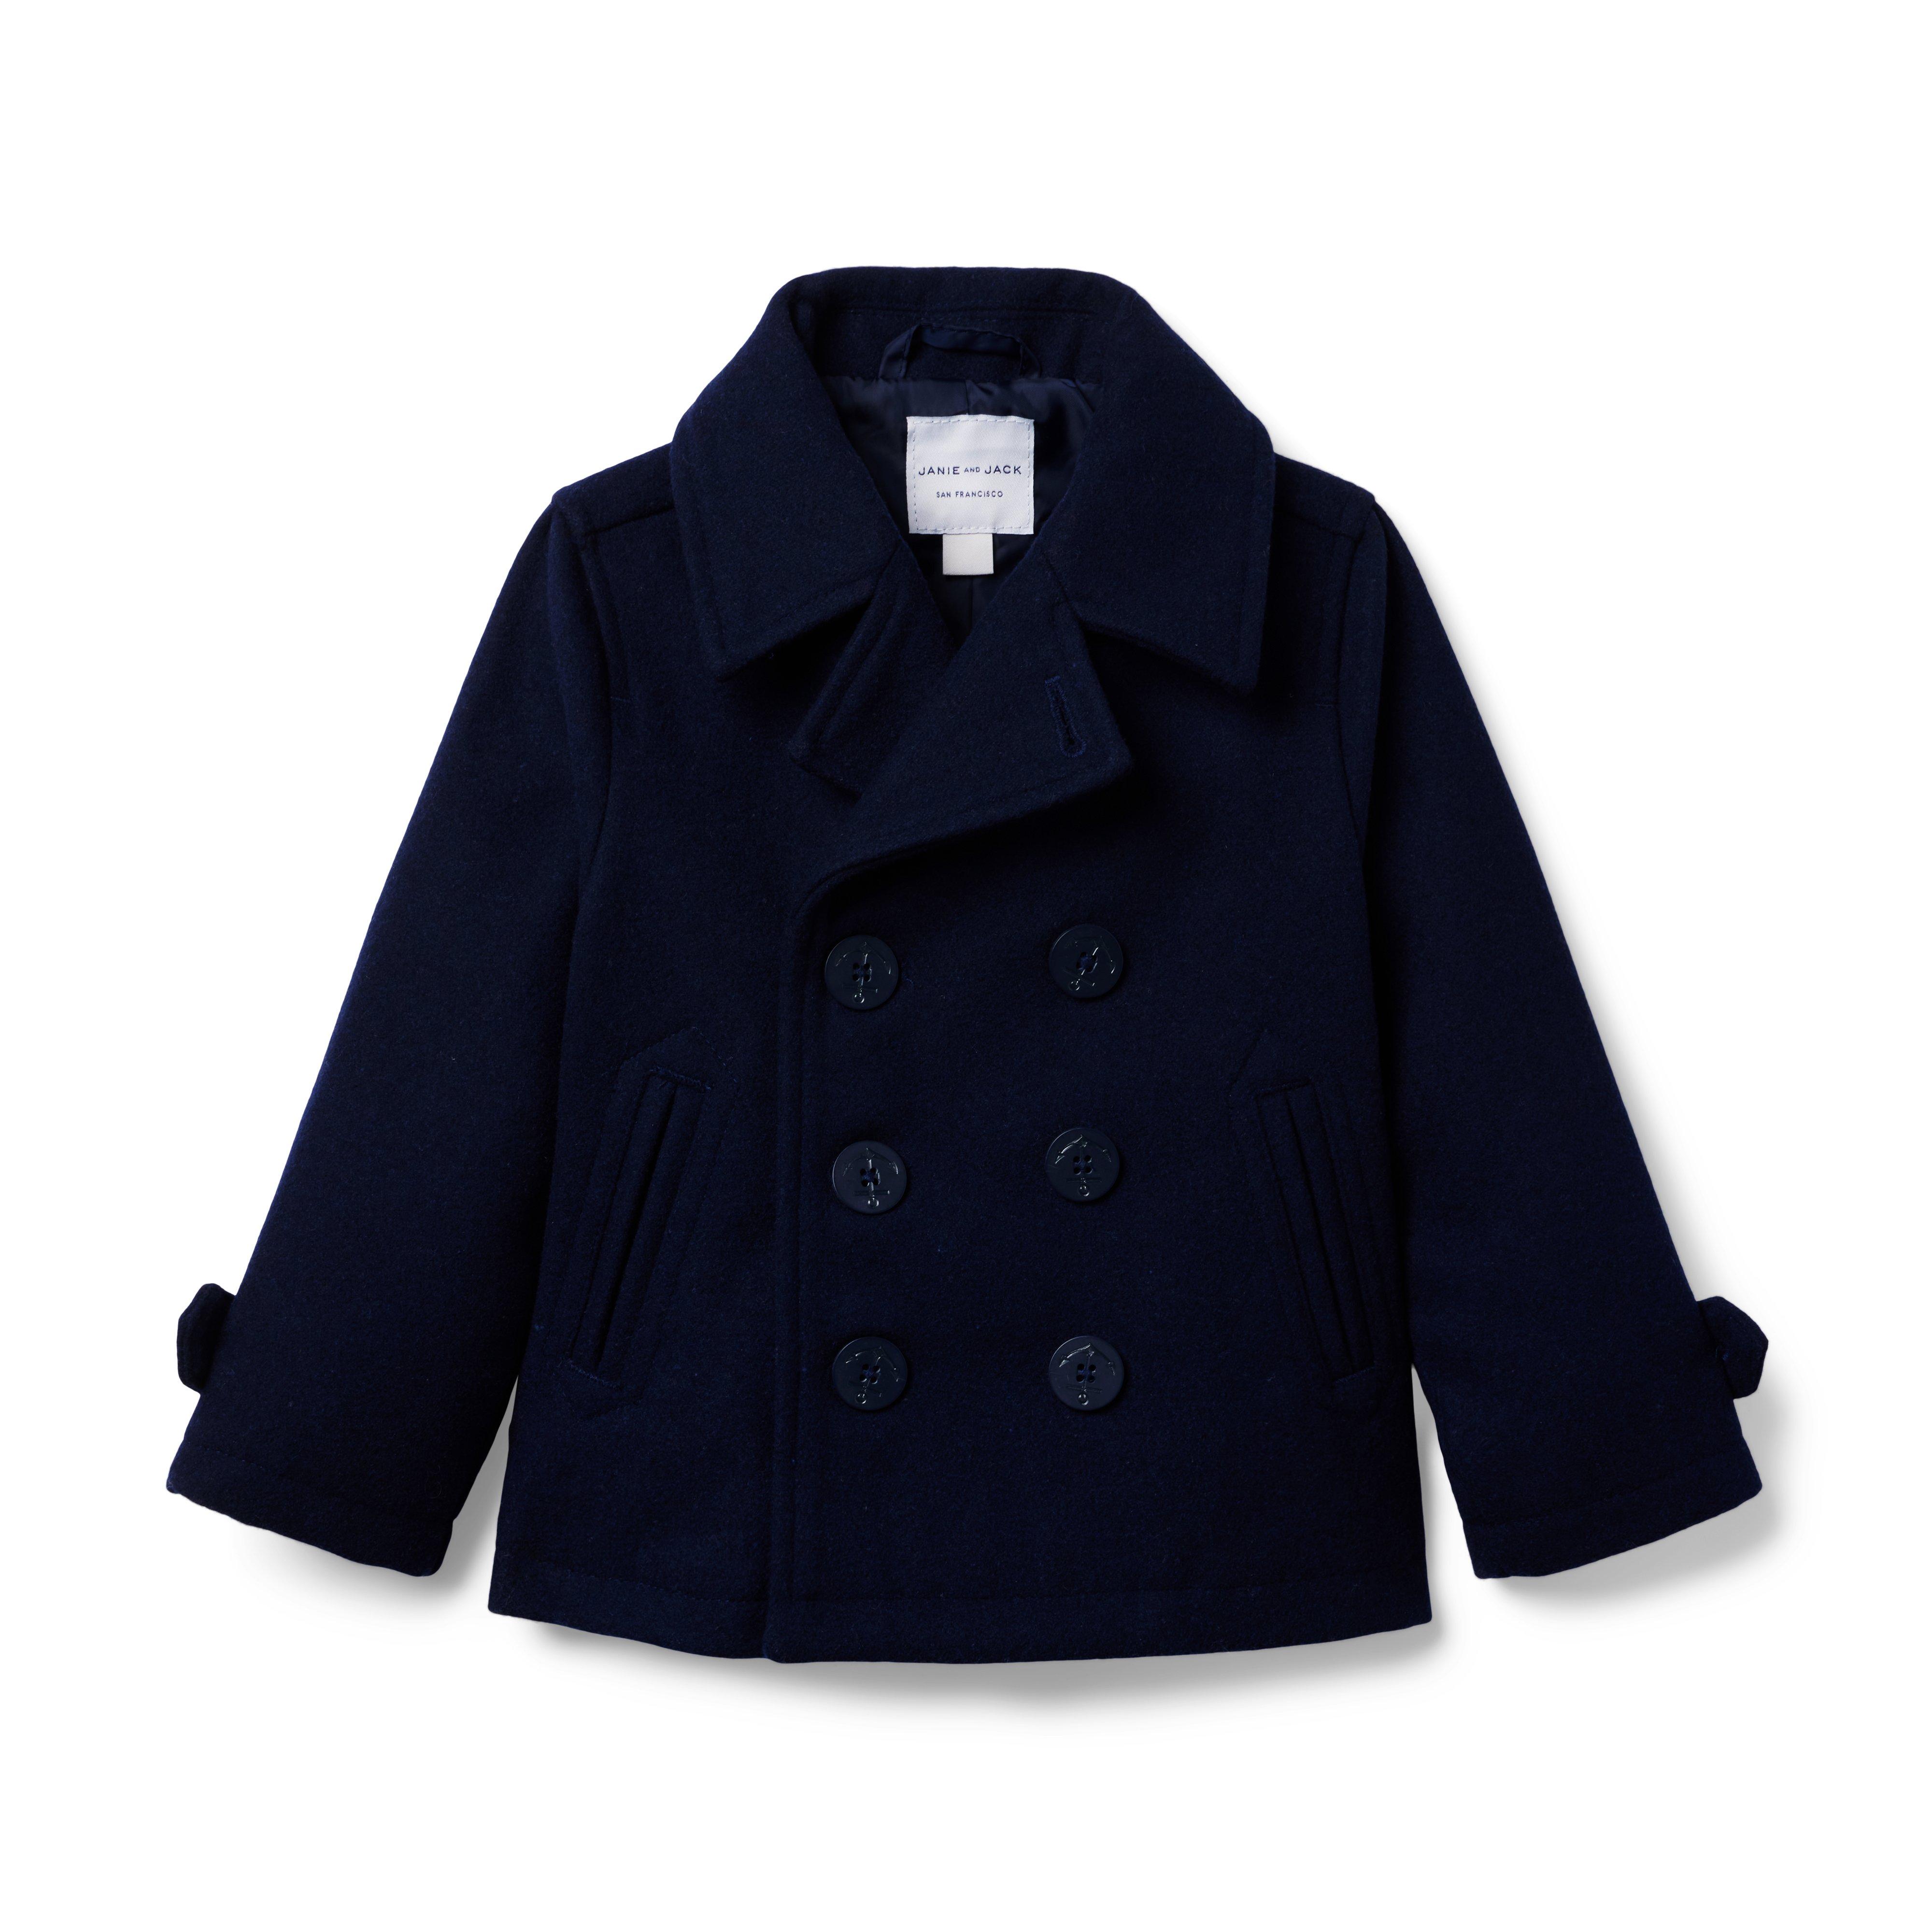 The Wool Holiday Coat